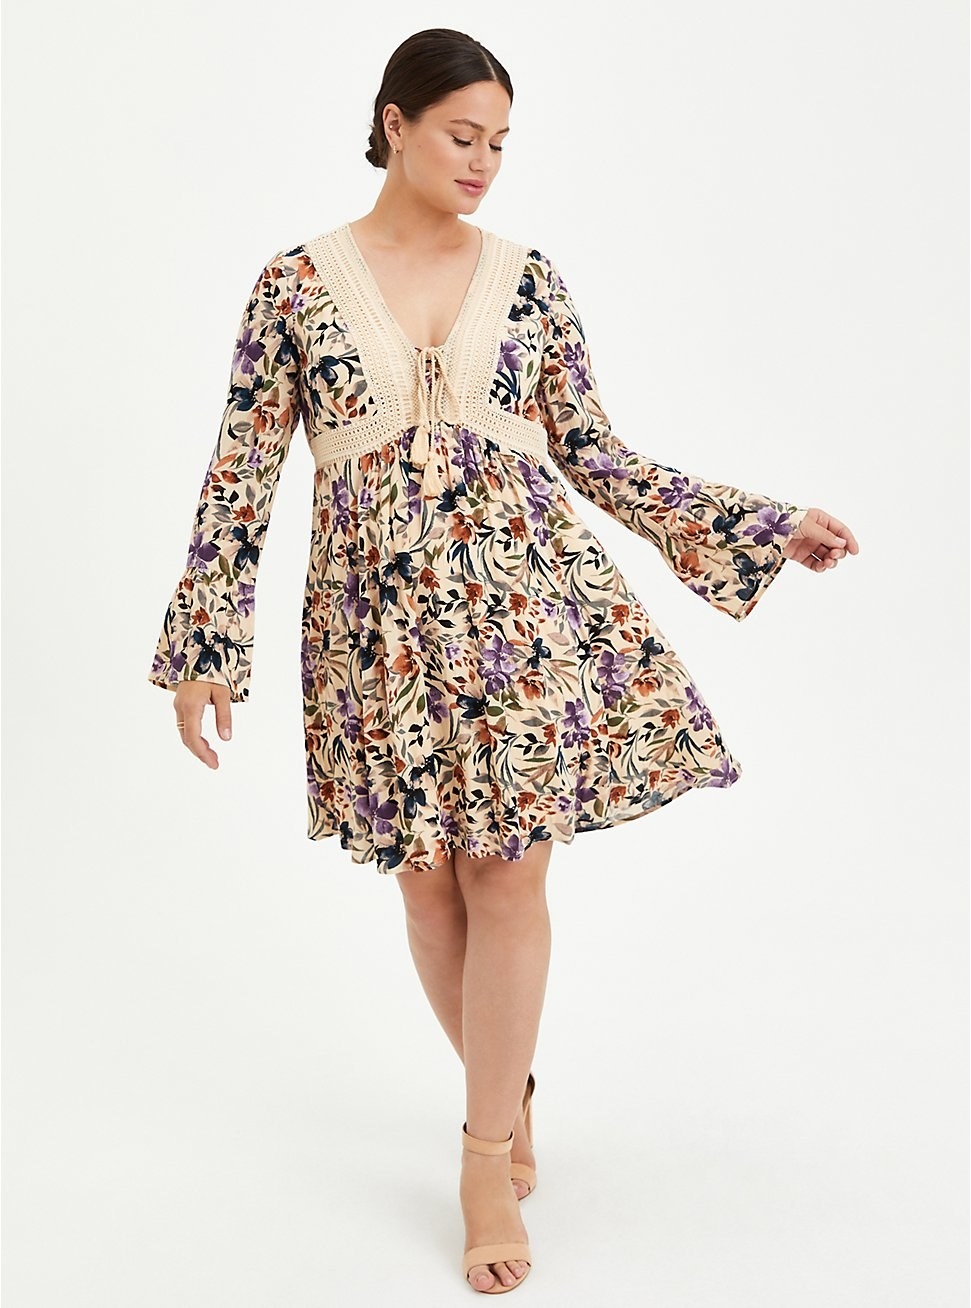 model in tan bell sleeve short dress with colorful floral print and crochet trim and tie at the bust